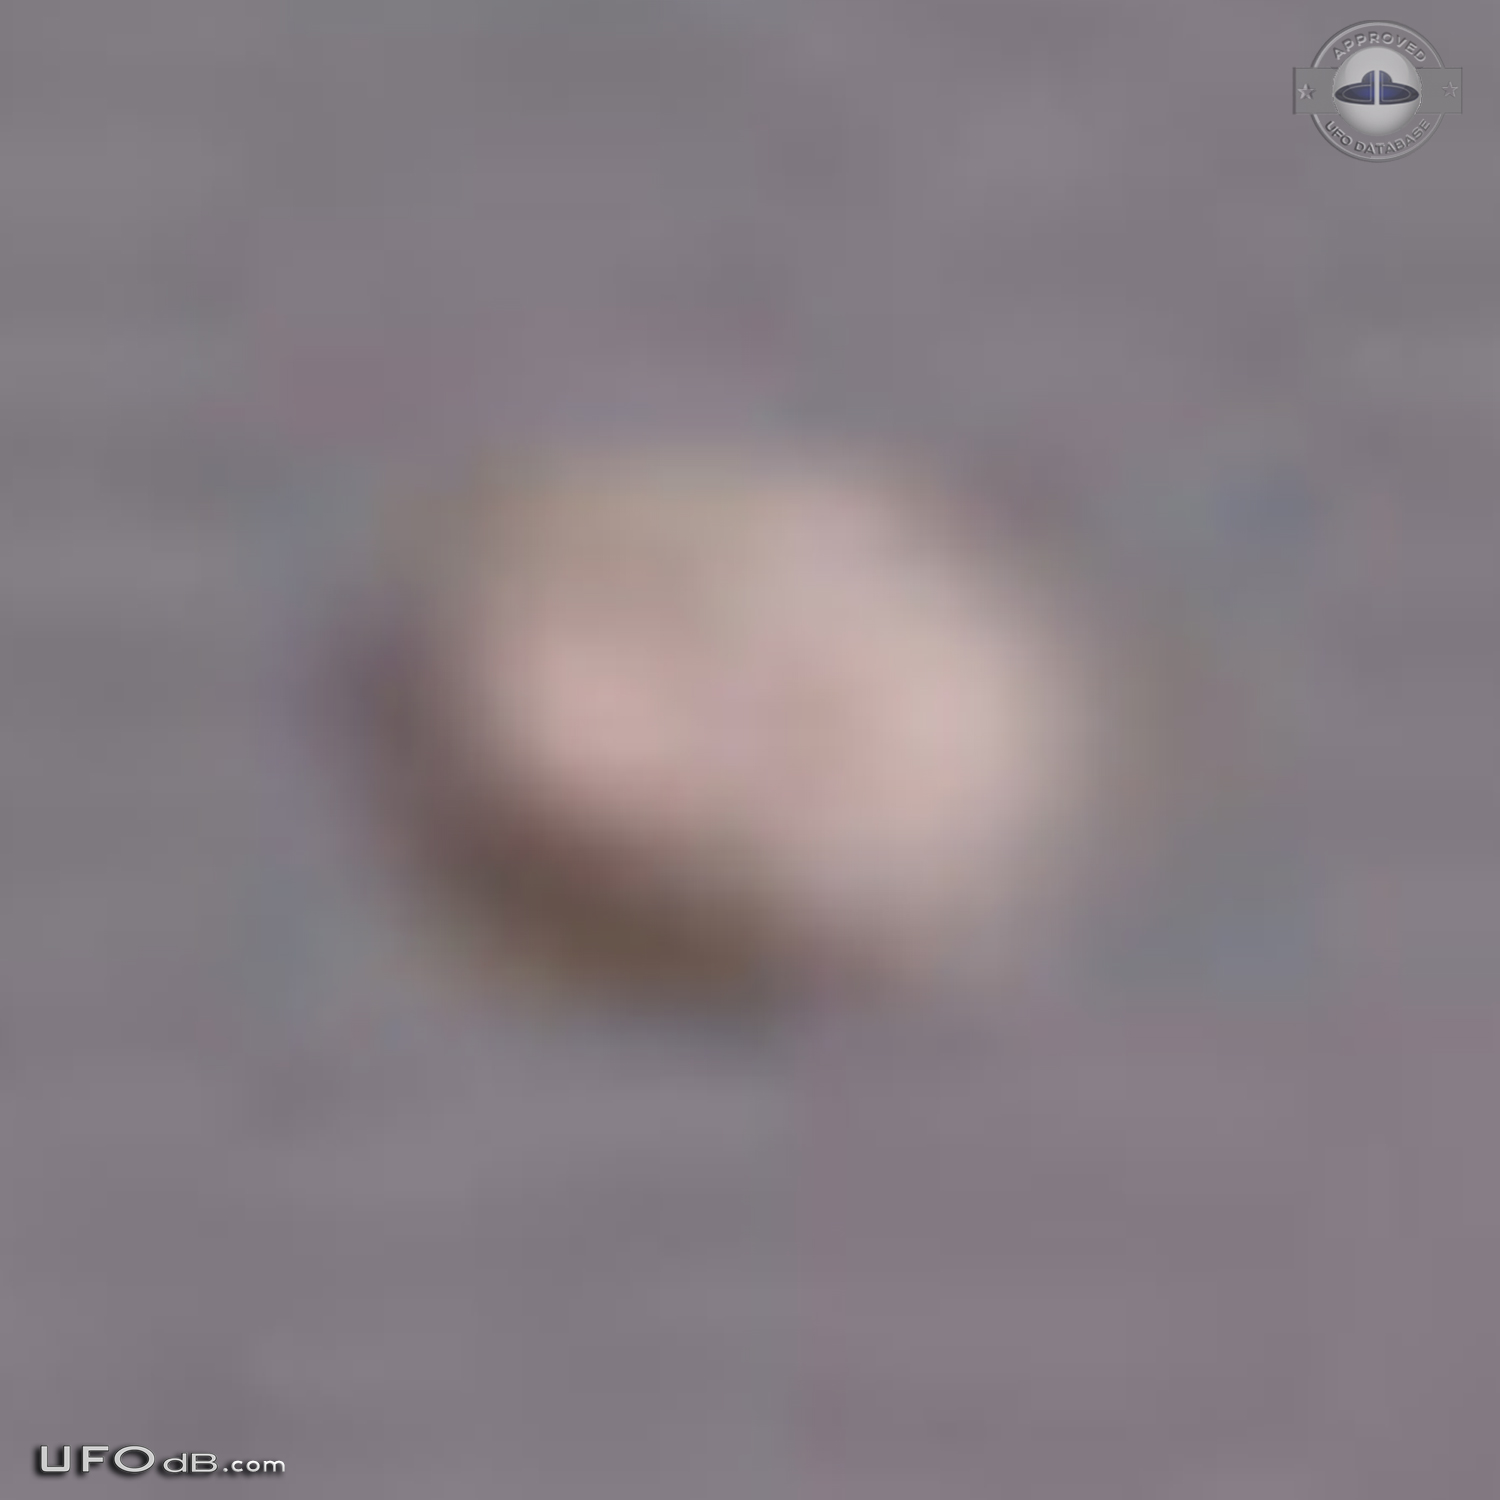 Famous Florida Uruguay UFO pictures sequence taken July 1977 UFO Picture #463-7